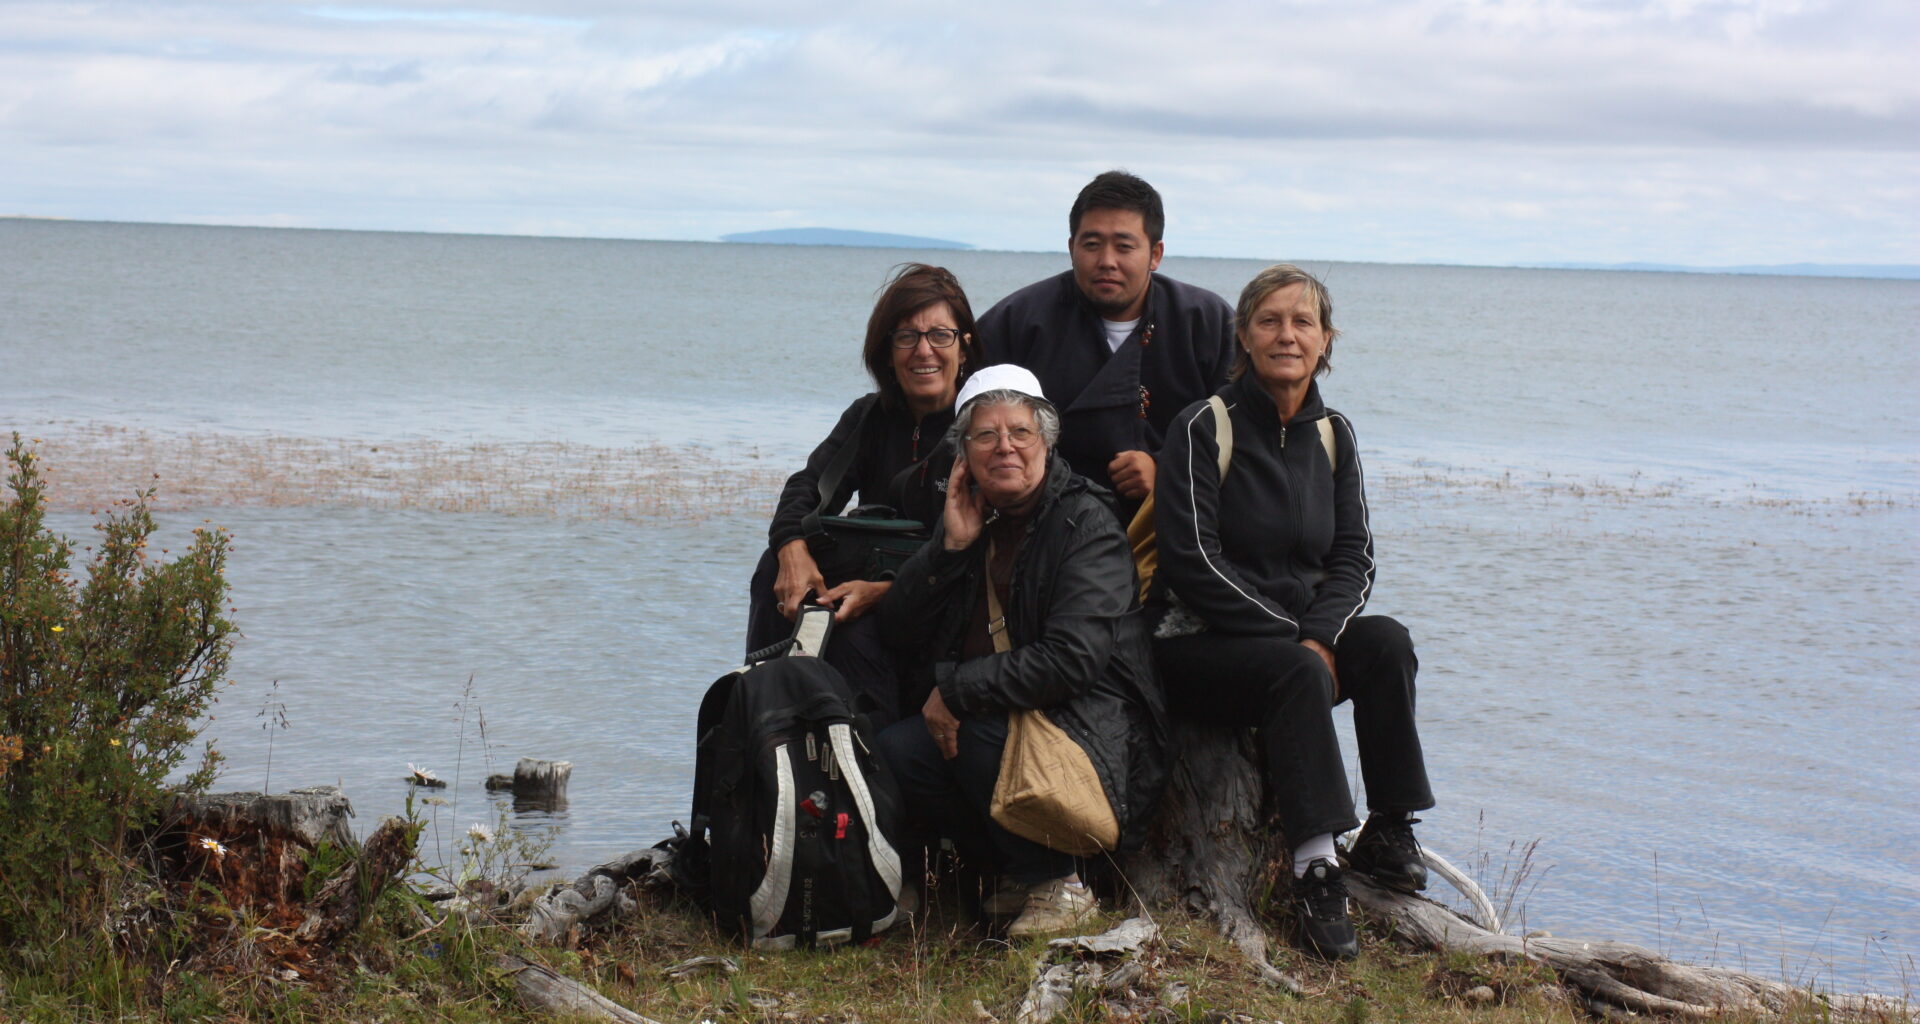 3 female customers from Italy traveled with our director Ganzo for 20 days. 2011